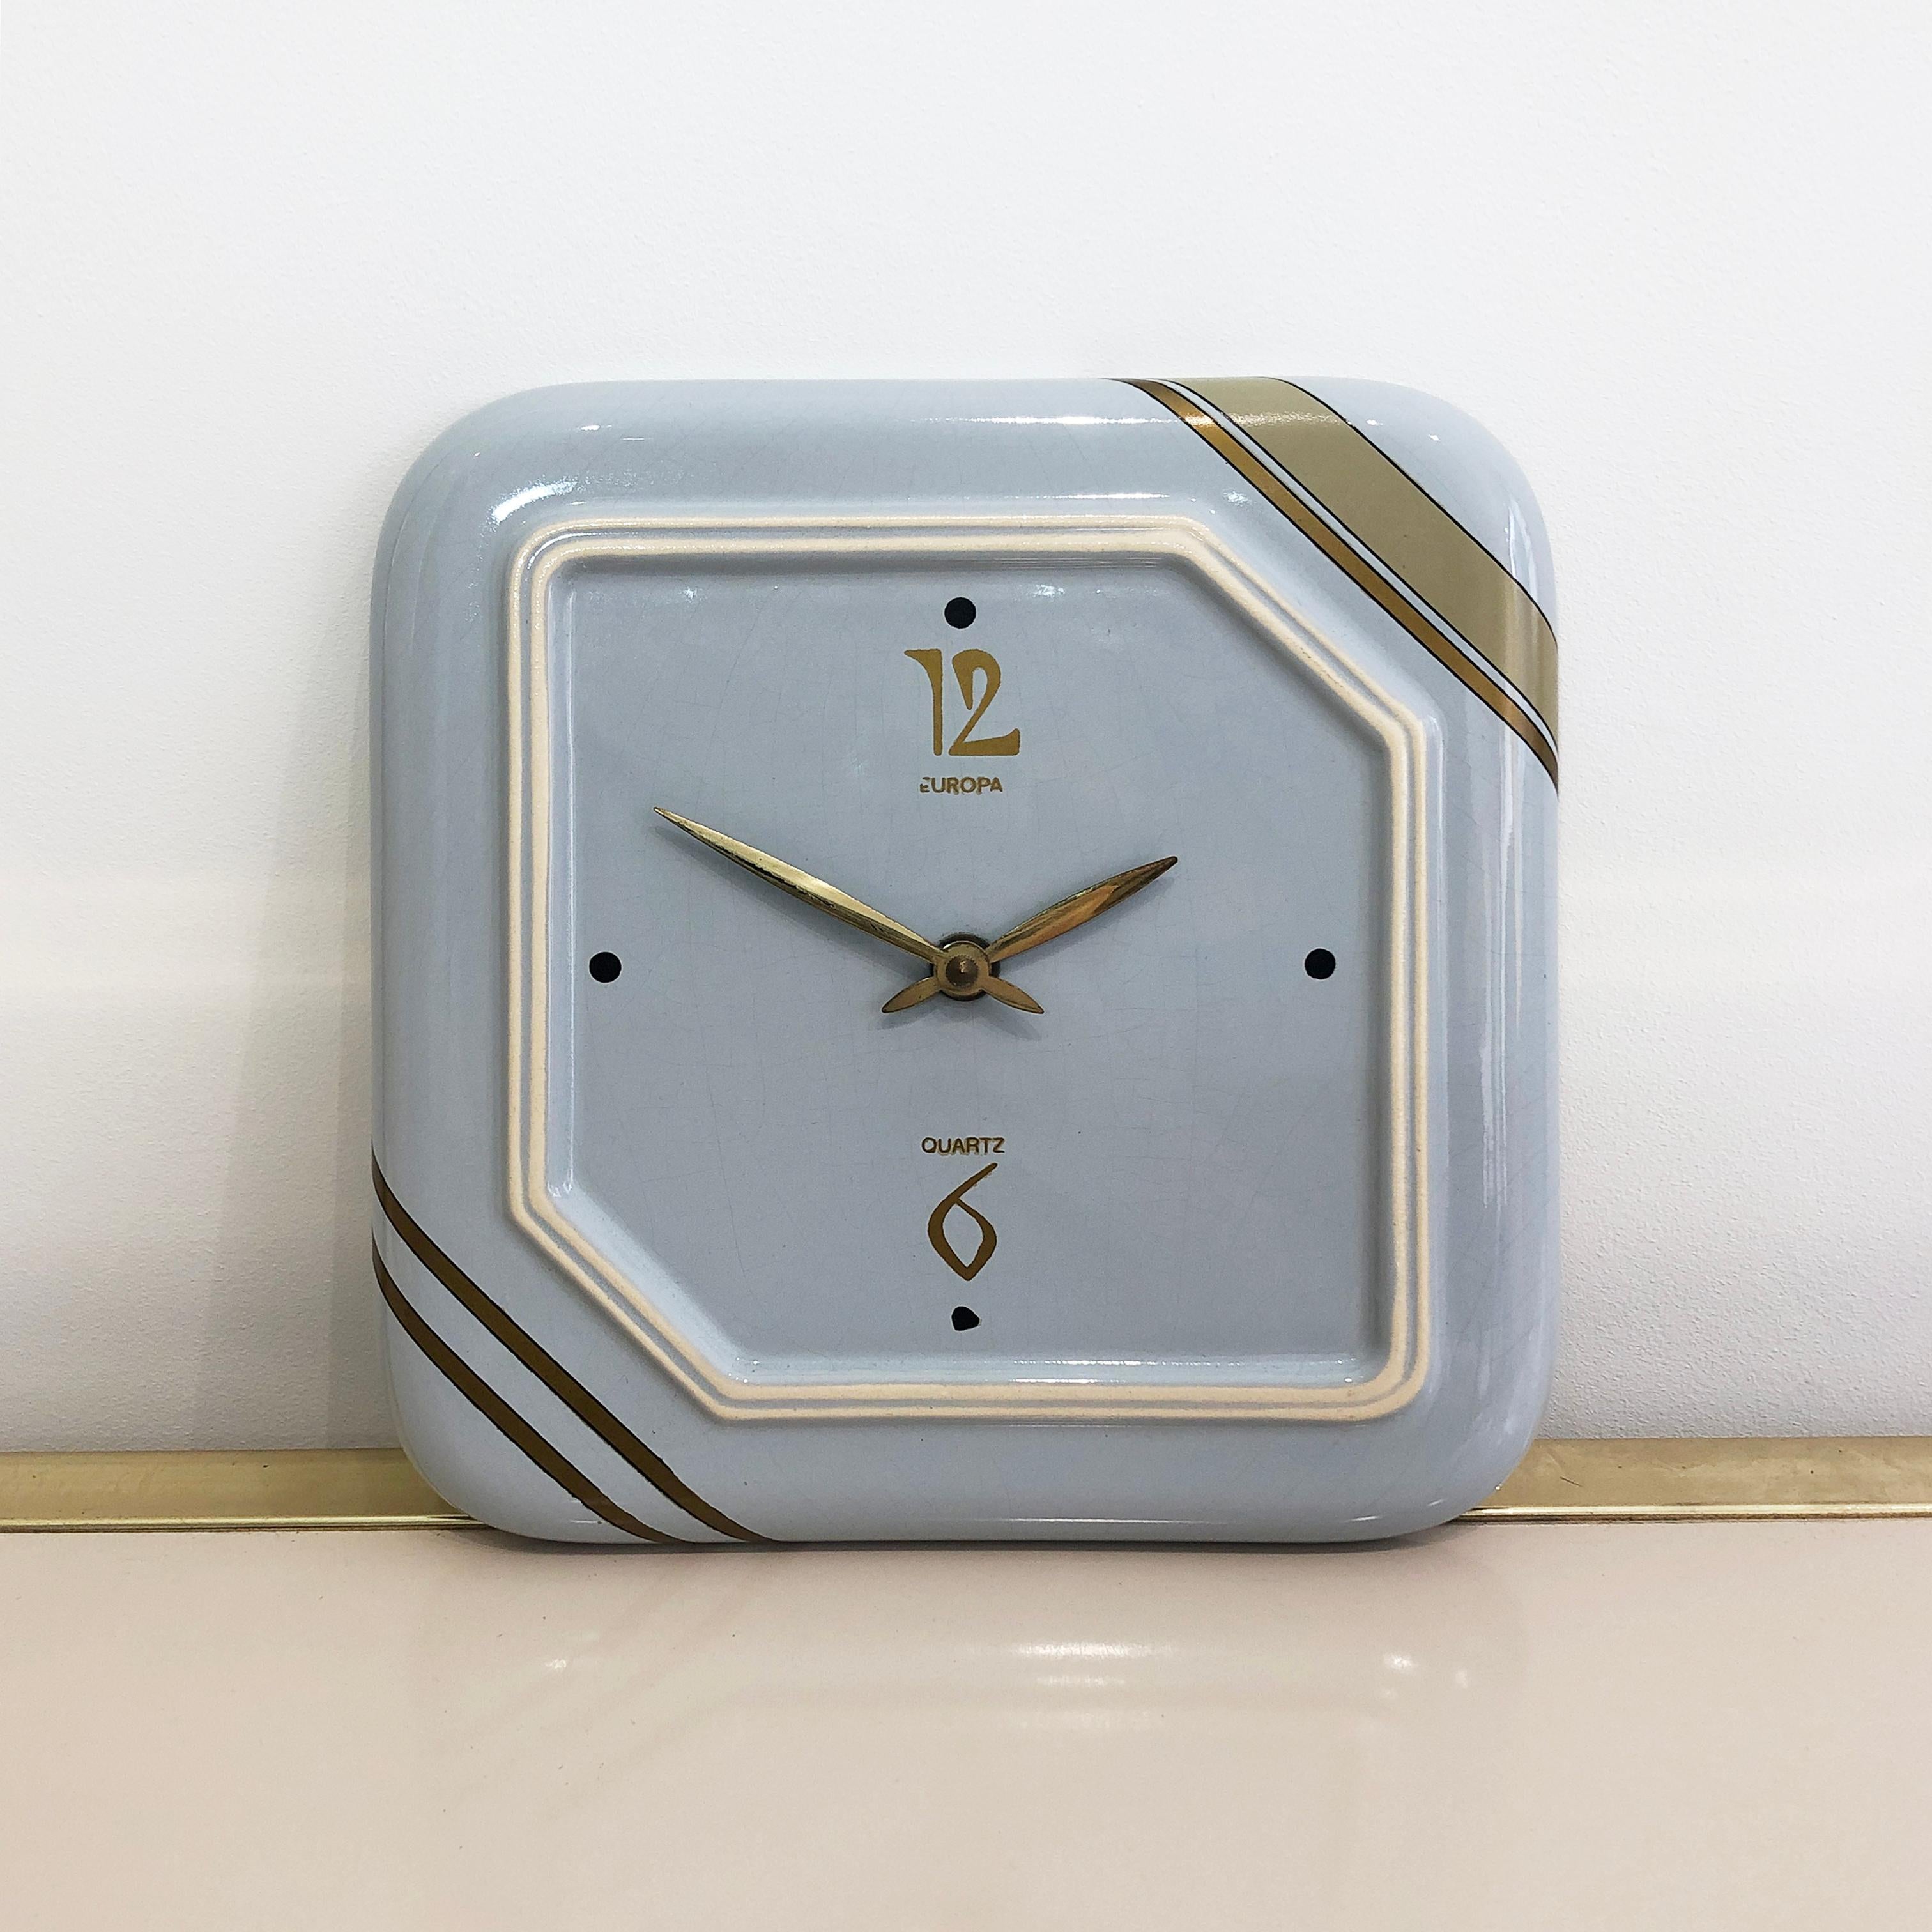 Finished with gold leaf and a Classic blue pastel colour, this square ceramic wall clock, marked “Handarbeit 42154”, is a fine example of midcentury West German craftsmanship. 

Minimal, and with a rustic elegance, this timepiece would be an